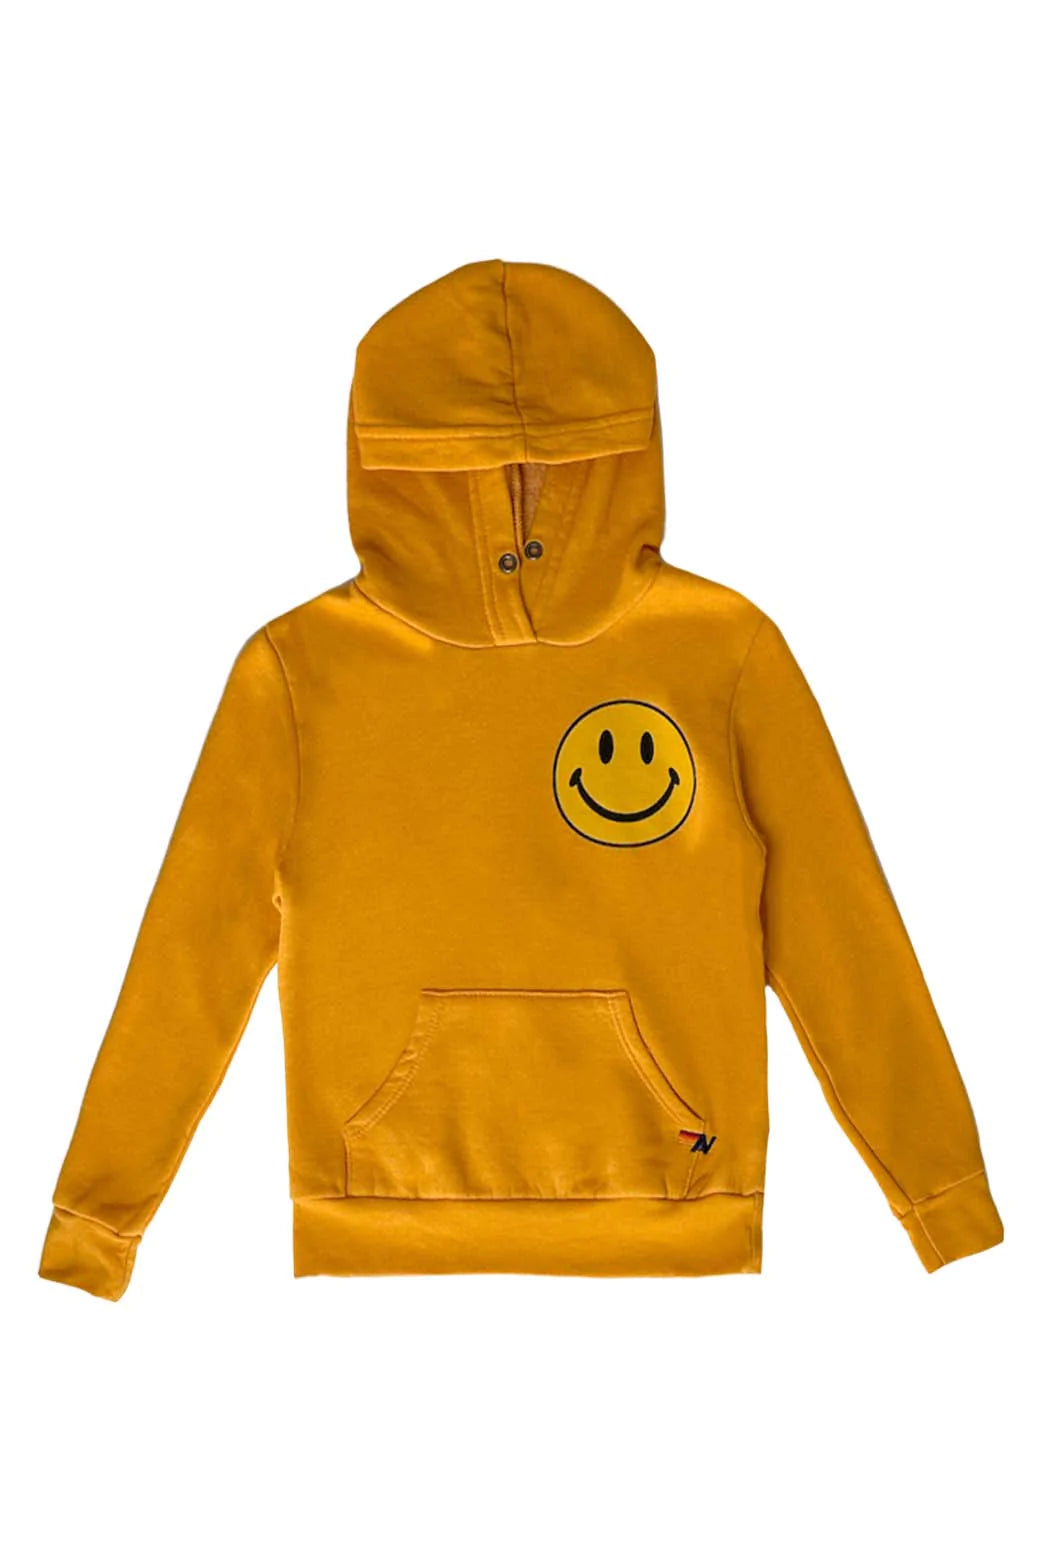 Aviator Nation Kid's SMILEY PULLOVER HOODIE - Gold